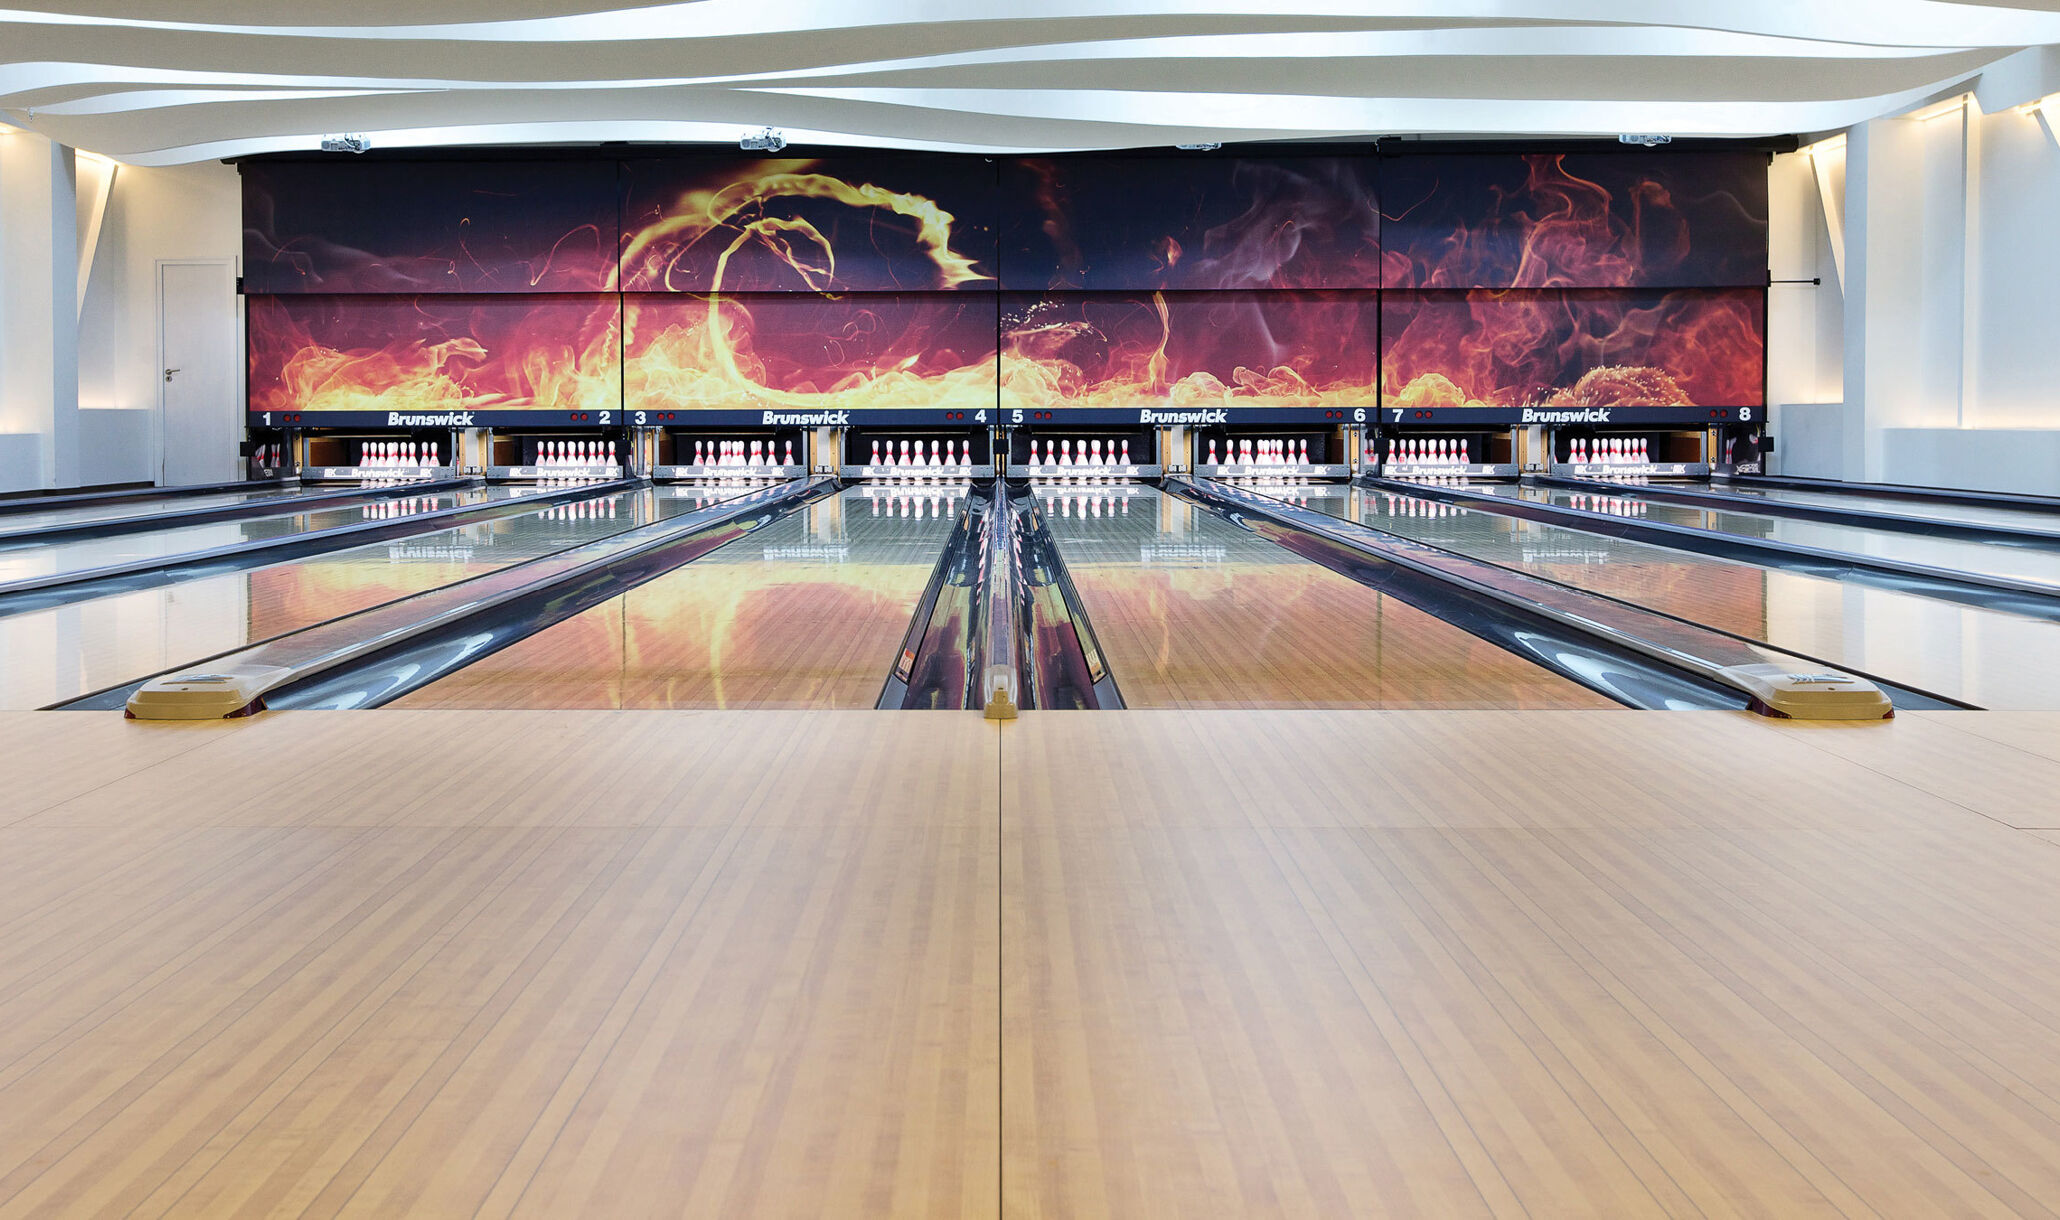 Pearl Bowling Center Budapest Hungary 16X9 04-1